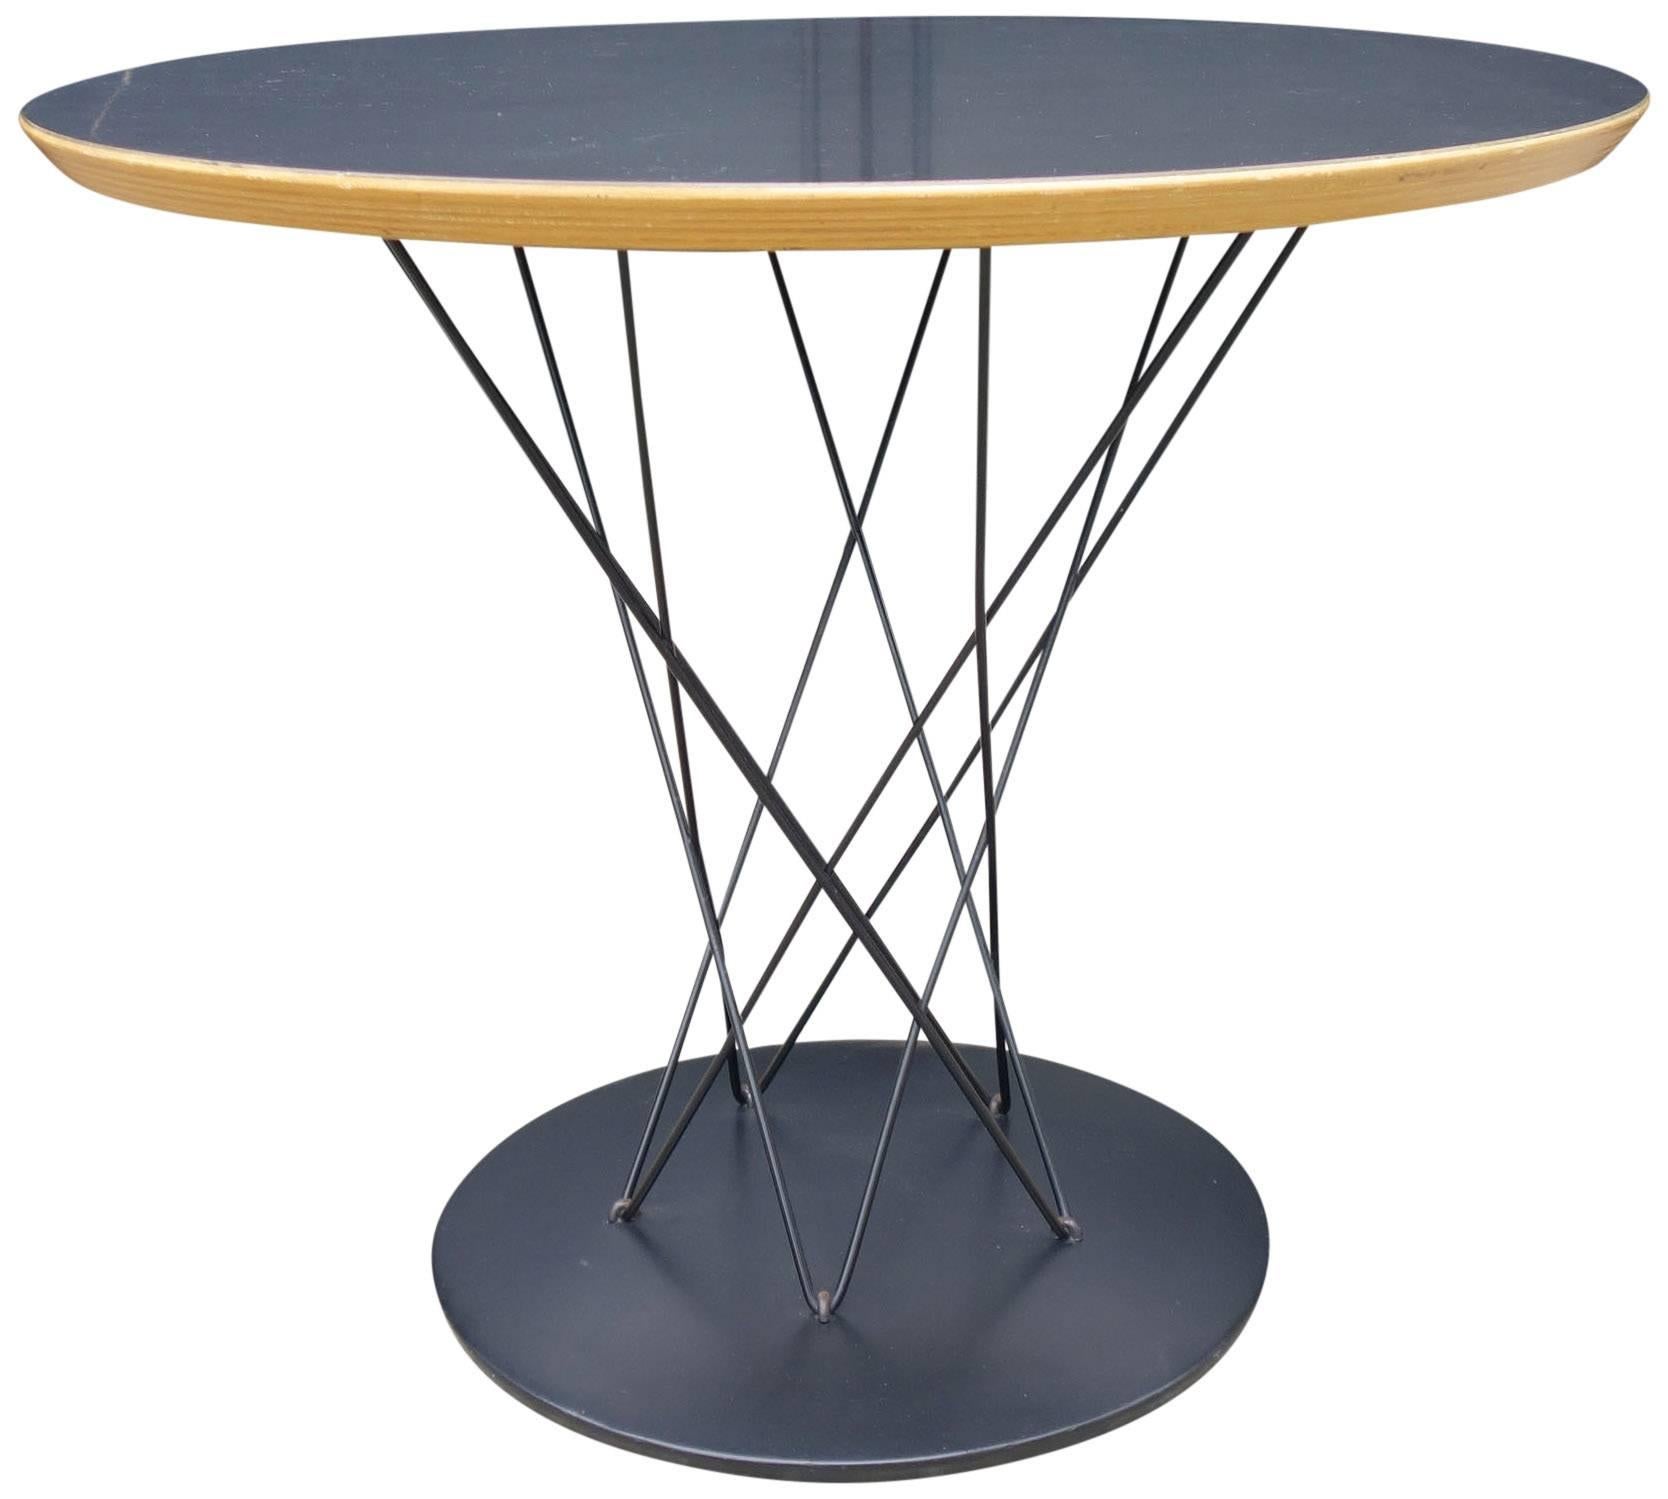 For your consideration is this striking Isamu Noguchi Childs table in the harder to find black on black version. Vintage from the 1960s the table displays minimal wear.